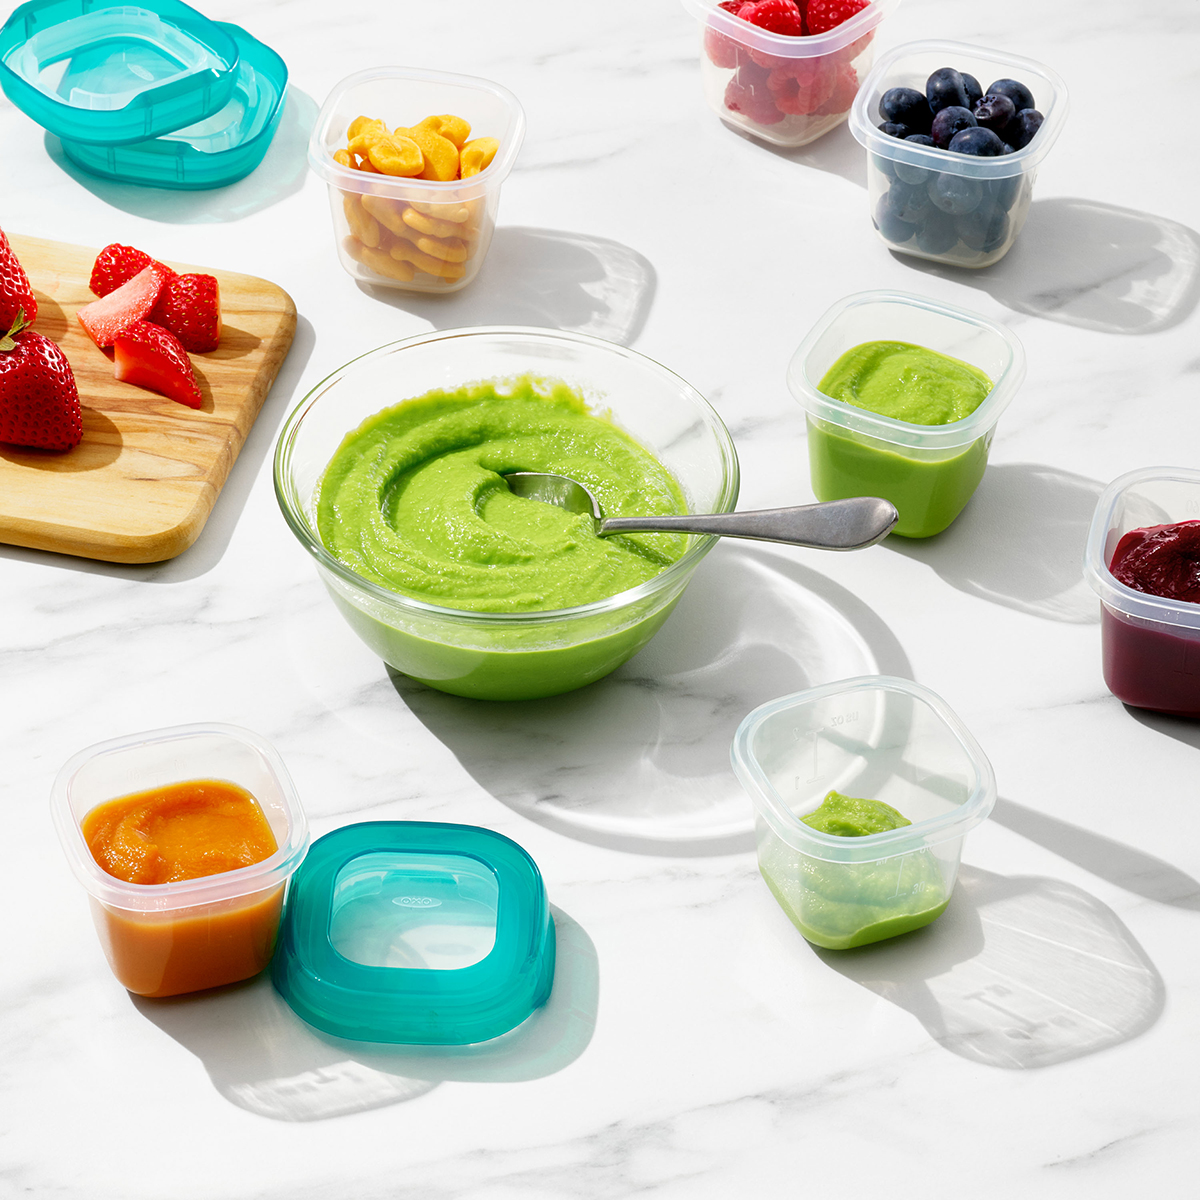 https://www.containerstore.com/catalogimages/407483/10083008-TOT-Silicone-Baby-Food-Bloc.jpg